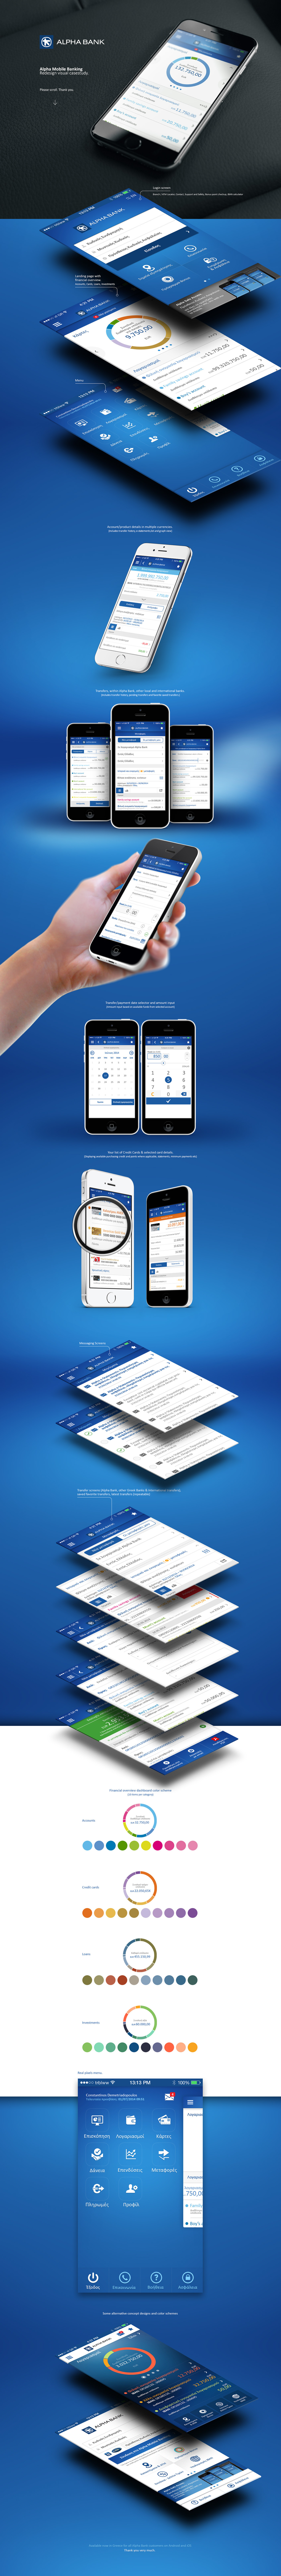 mobile banking Mobile Payments mobile banking alpha bank application ios ebanking Greece payments information design digital banking